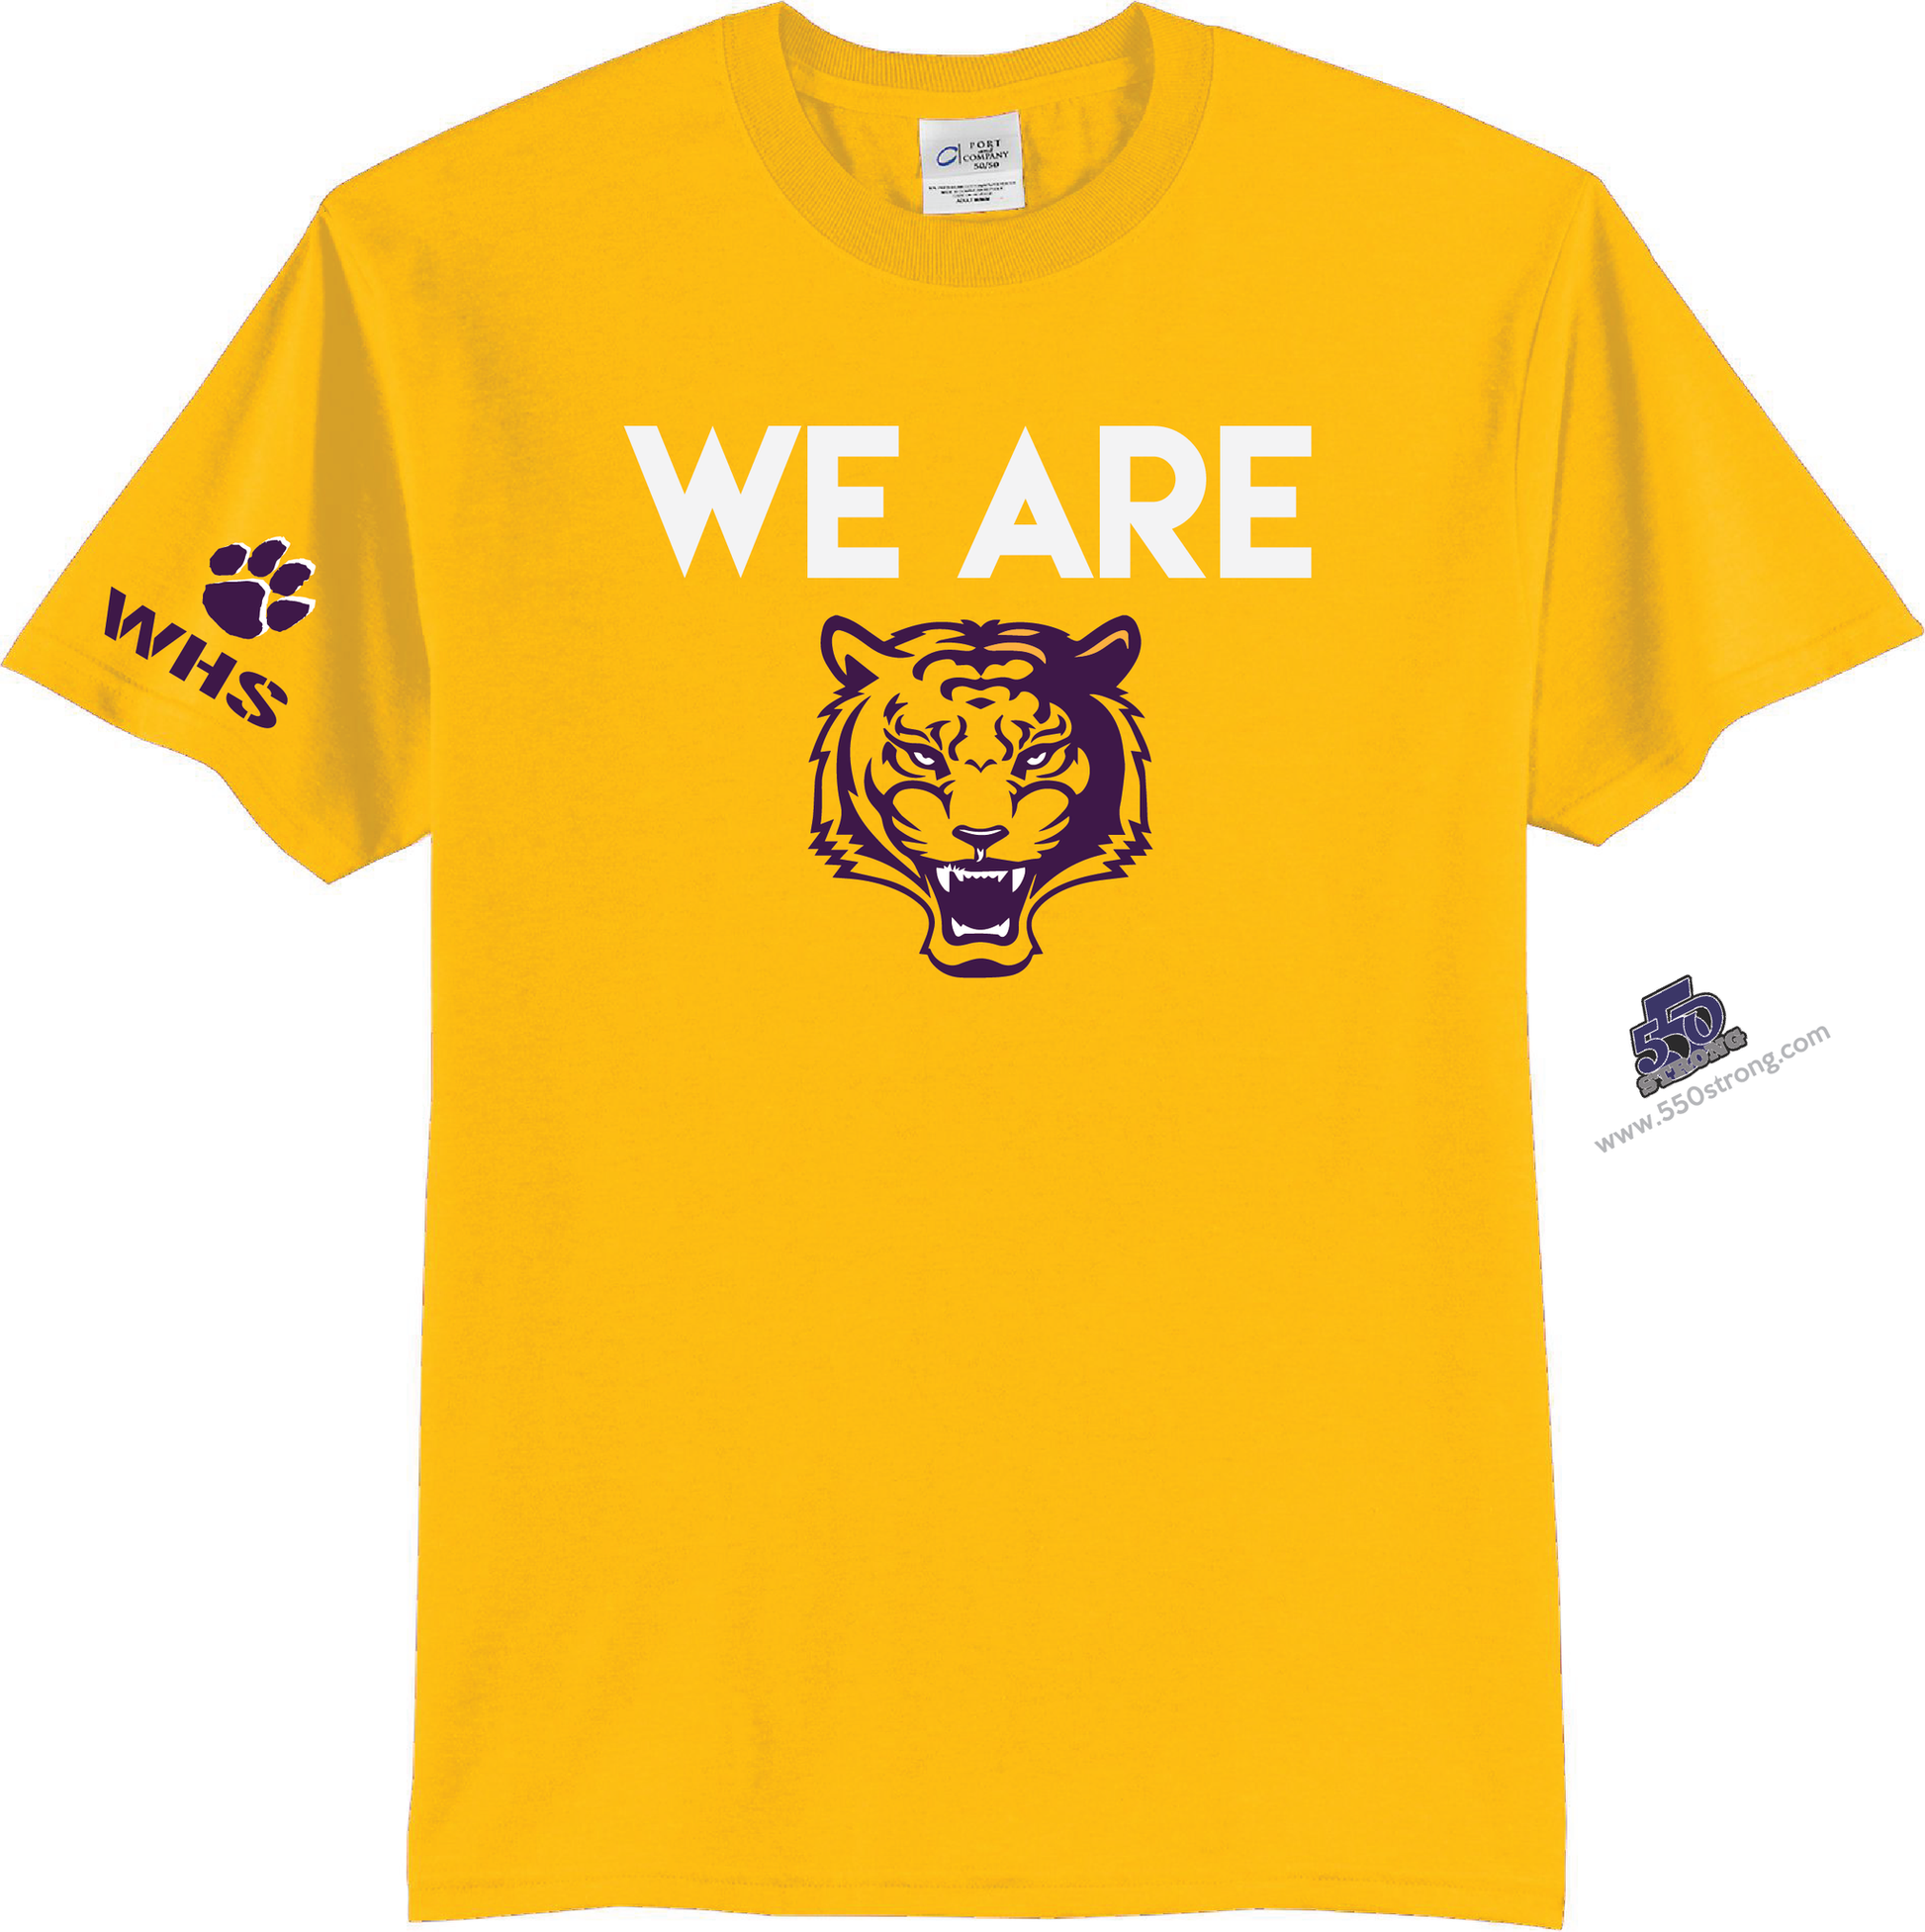 HS - We Are Wilson (Tigers) High School T-Shirt - Gold - 550strong